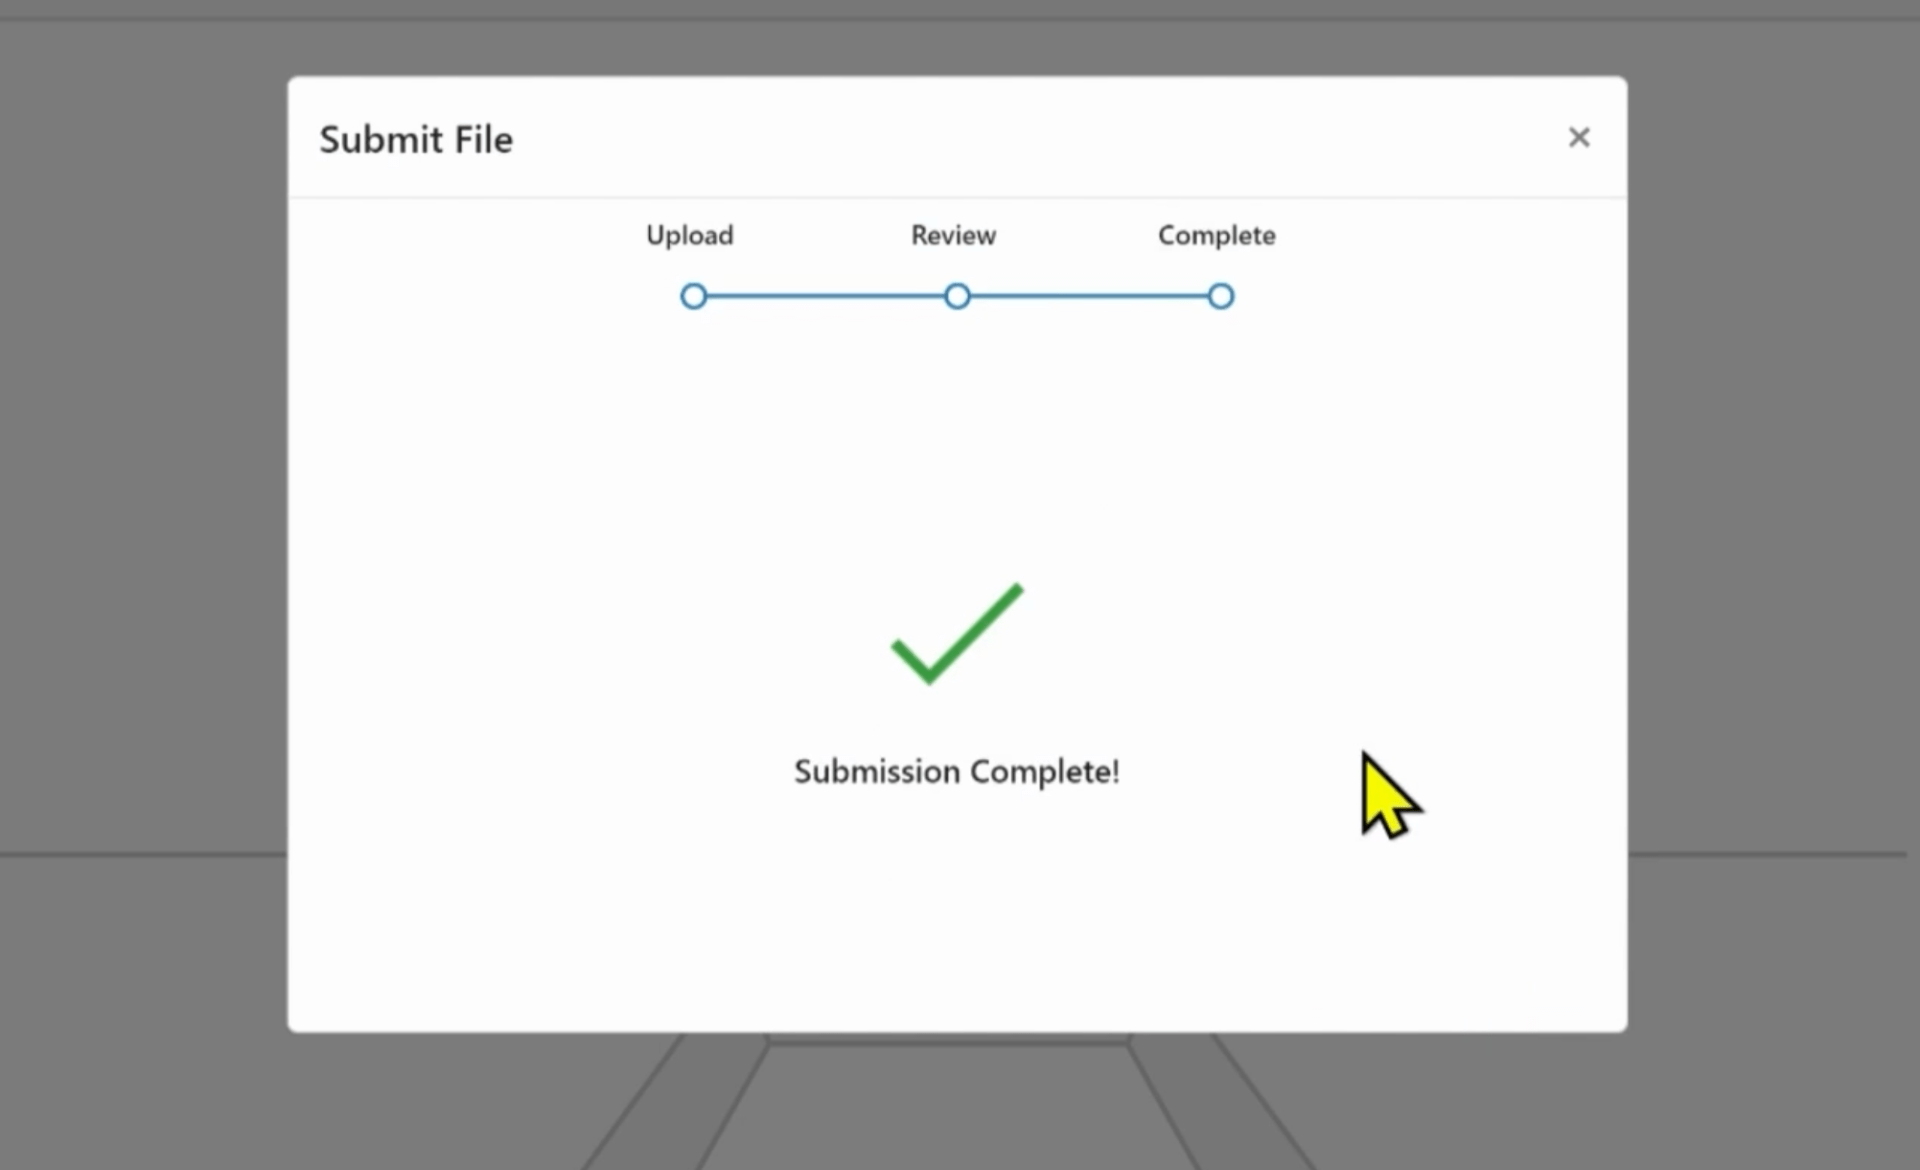 Screenshot of assignment submission confirmation screen.